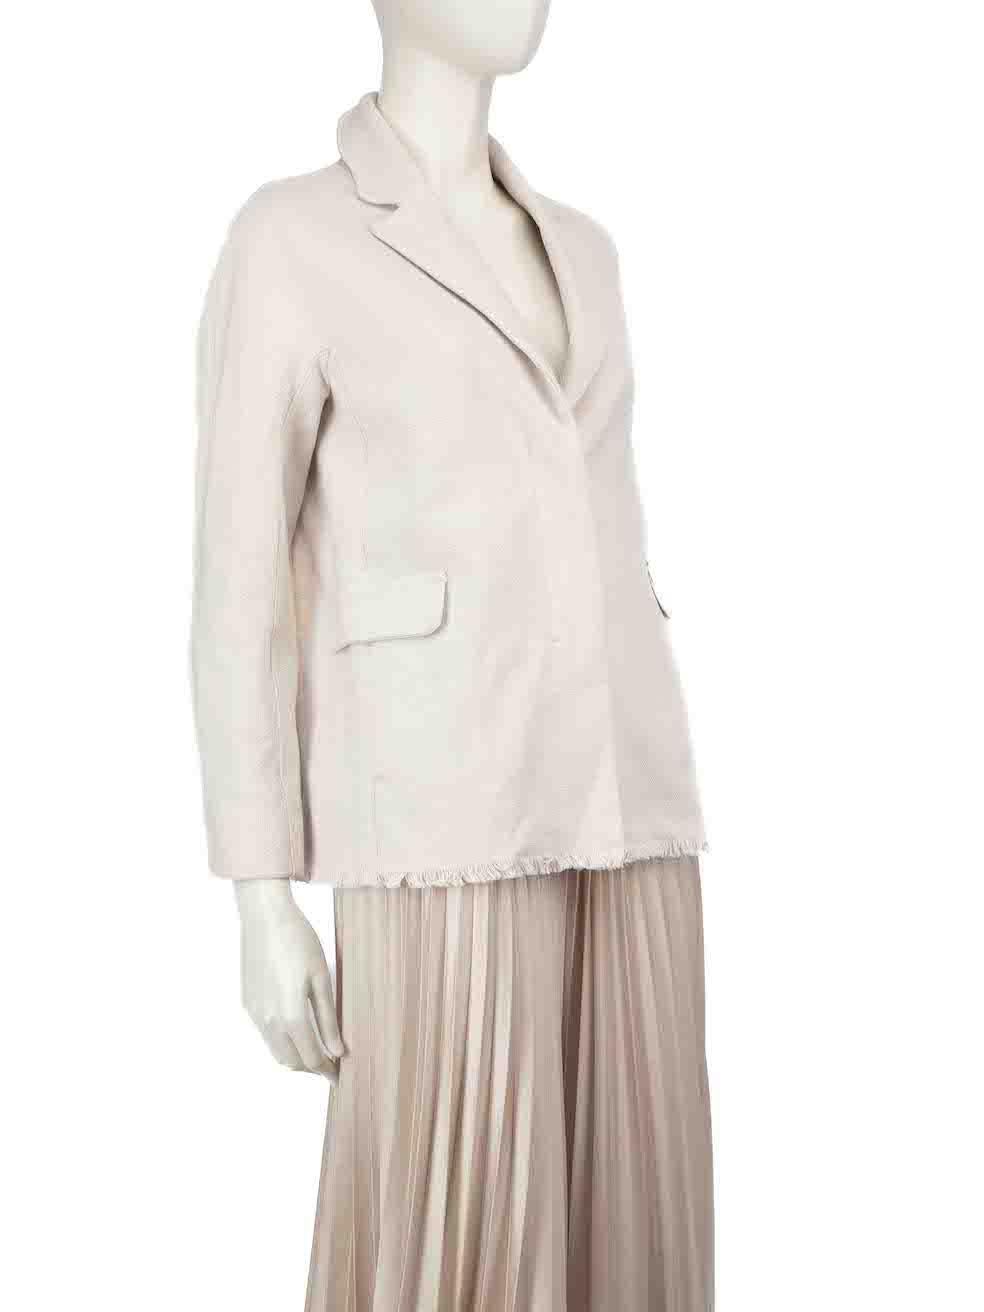 CONDITION is Good. Minor wear to blazer is evident. Light wear to the right side below the pocket is seen with a small discolouration mark on this used 'S Max Mara designer resale item.
 
 
 
 Details
 
 
 Ecru
 
 Cotton
 
 Blazer
 
 Mid length
 
